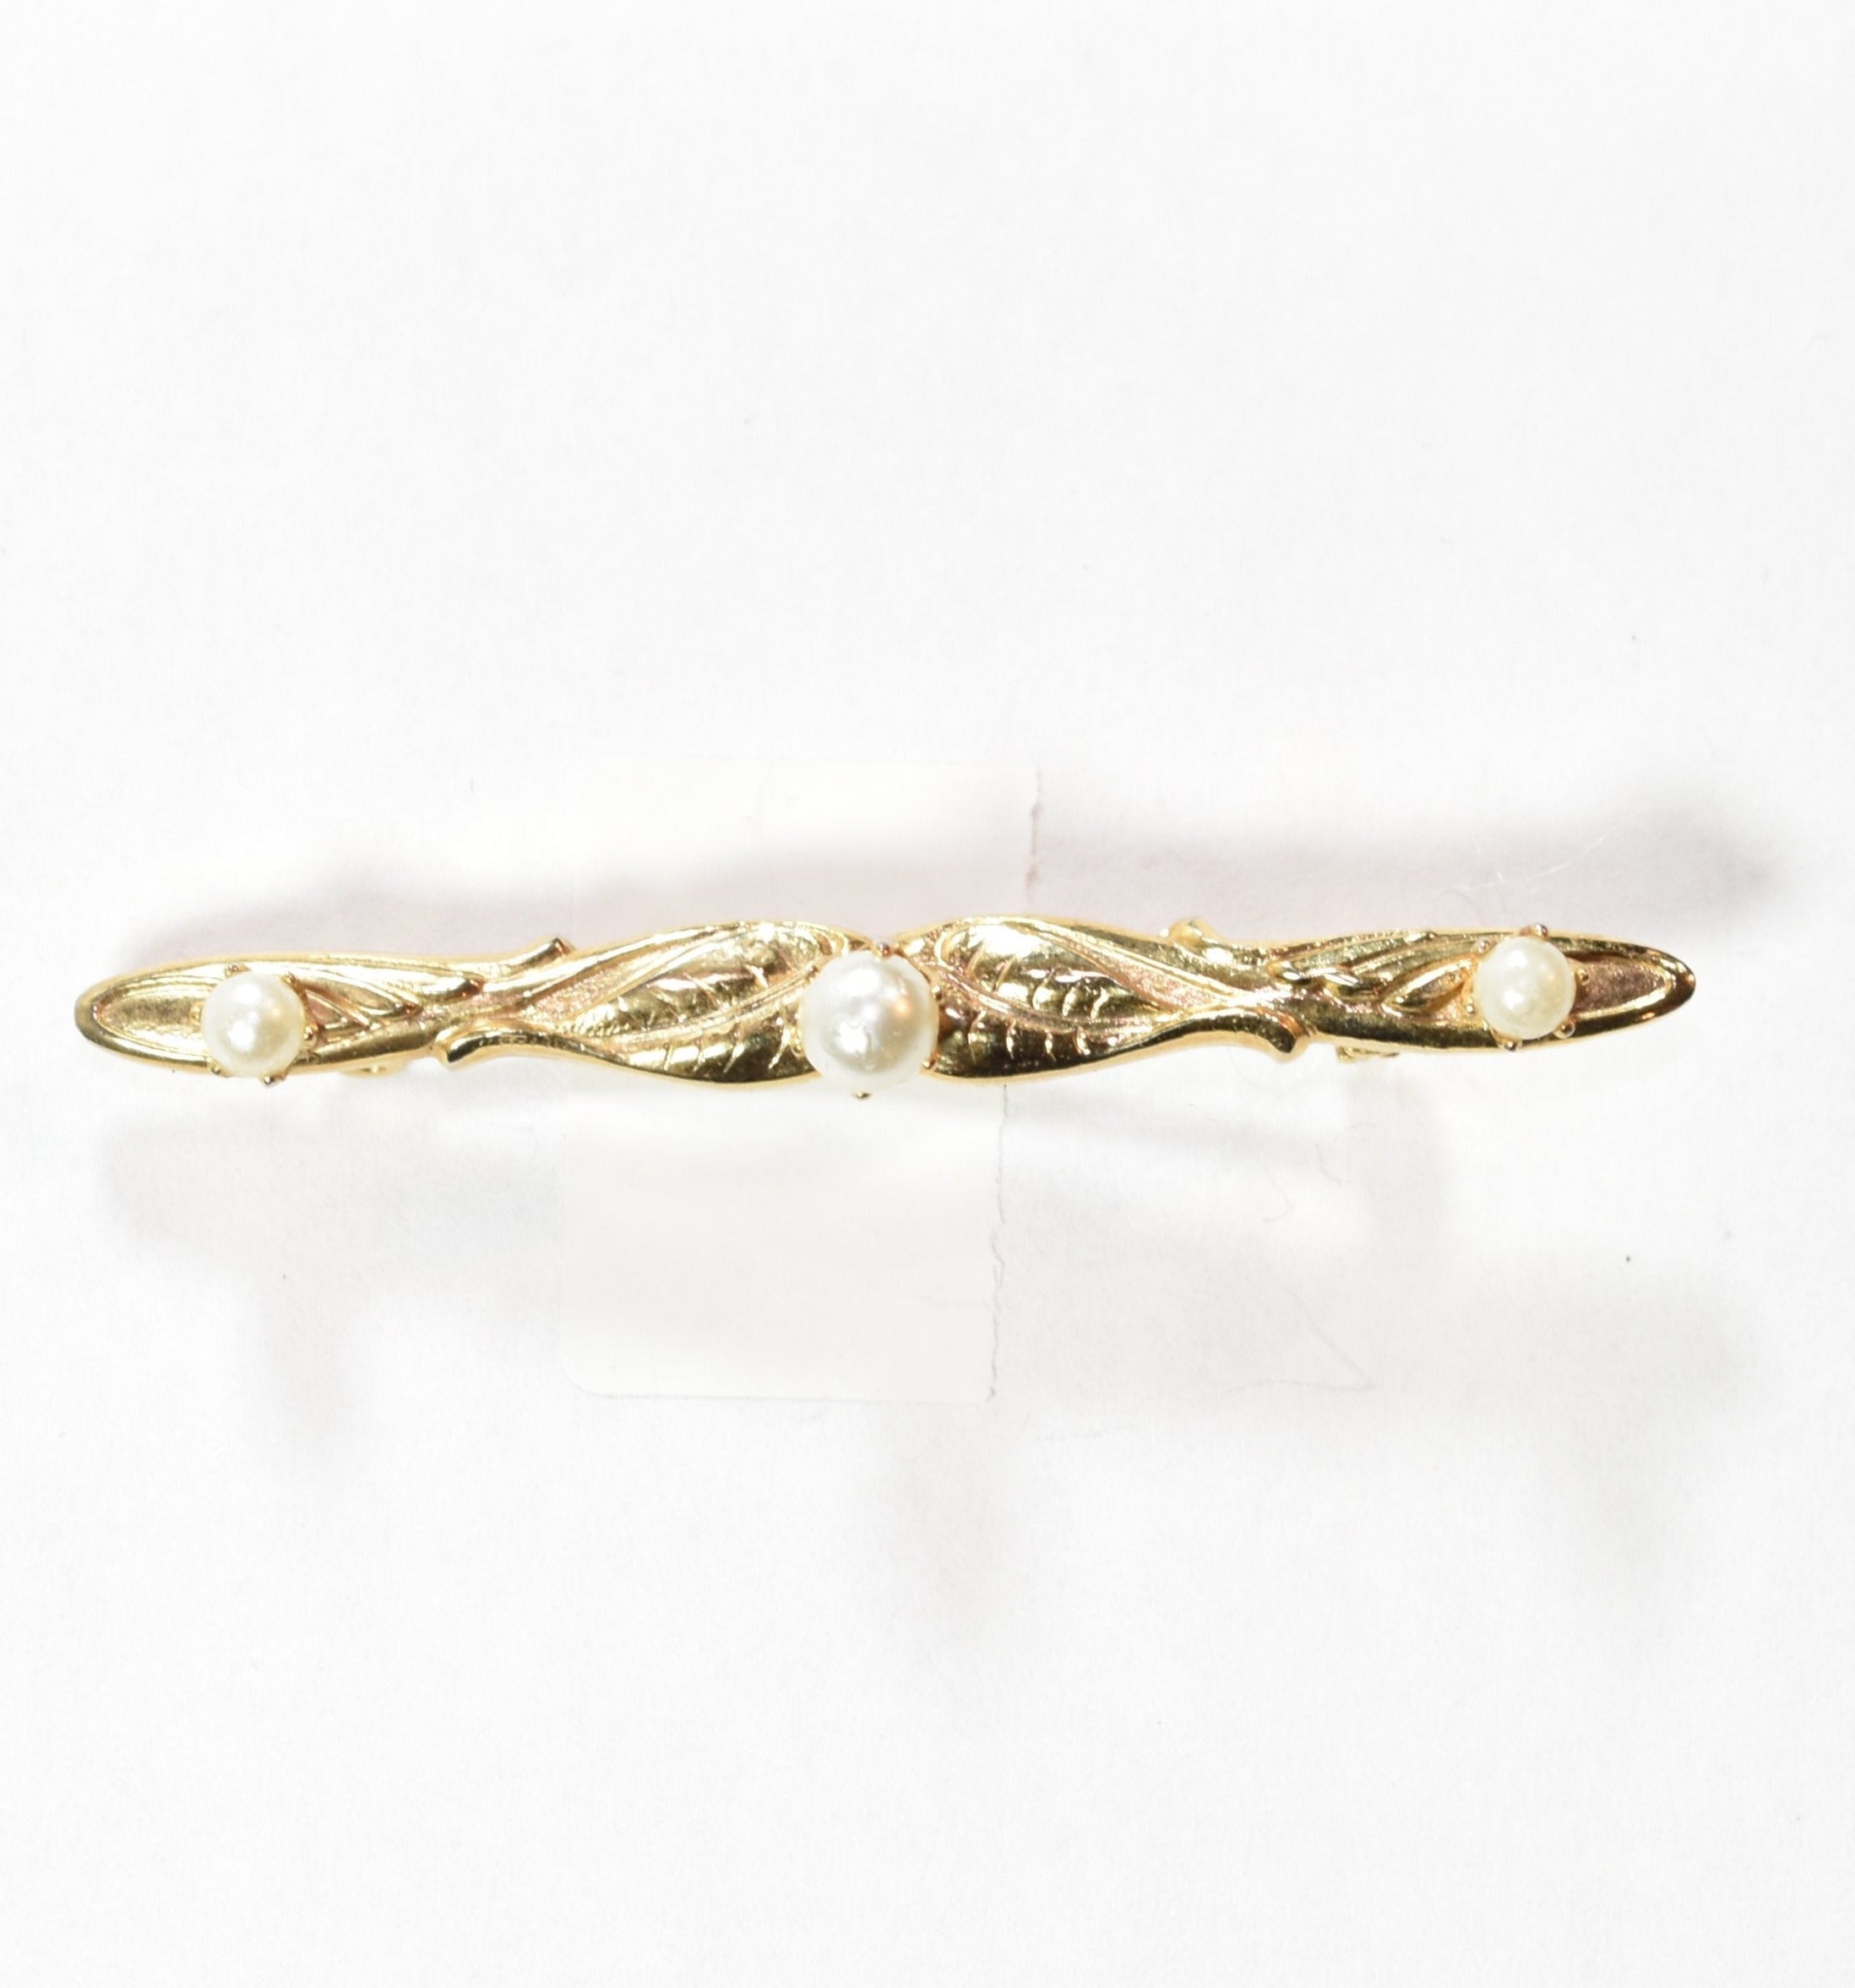 Brooch Pin vintage gold sweater pin pearls collectible bar leaf display used